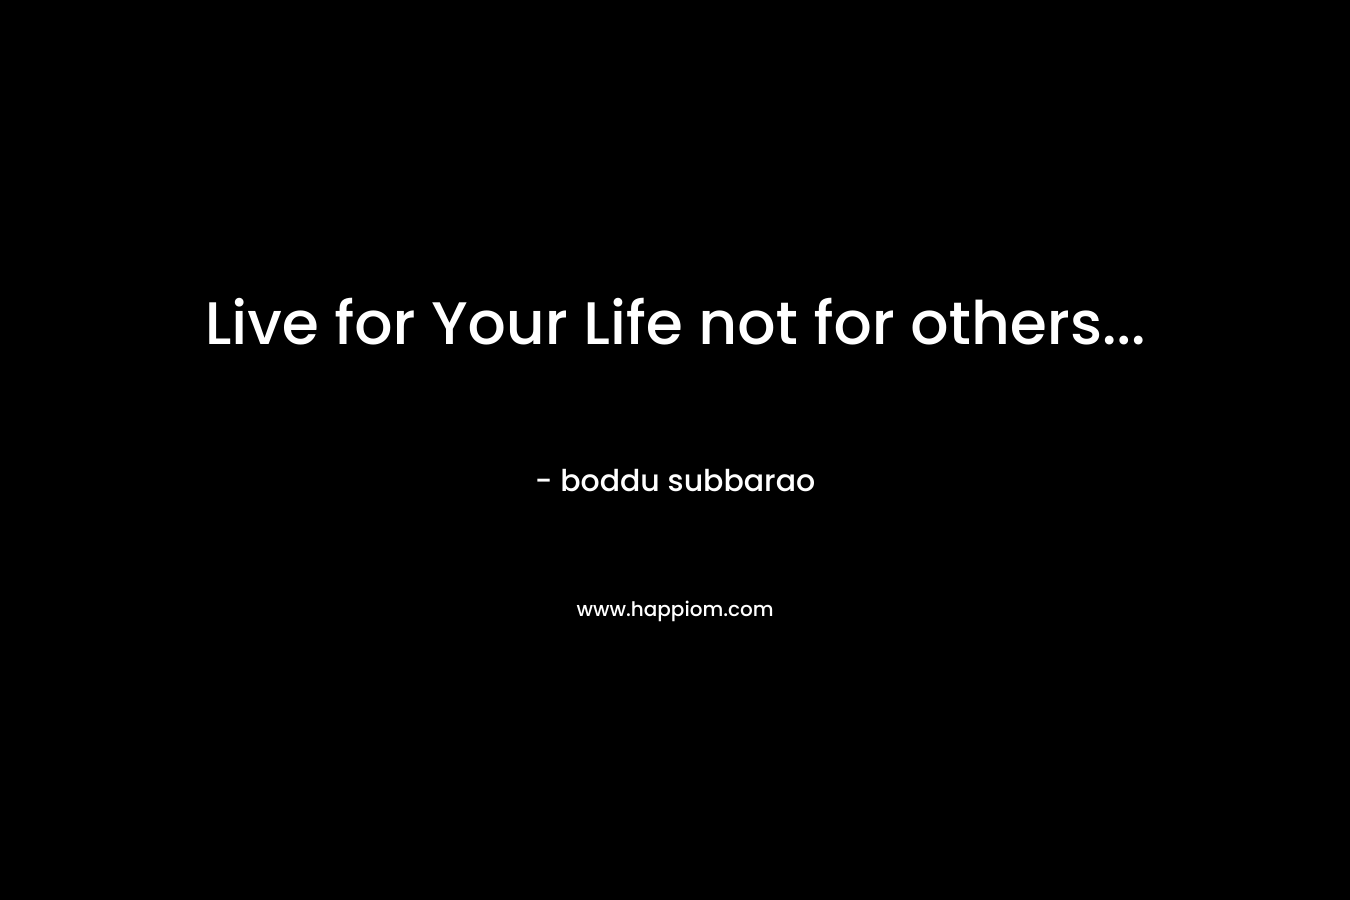 Live for Your Life not for others...